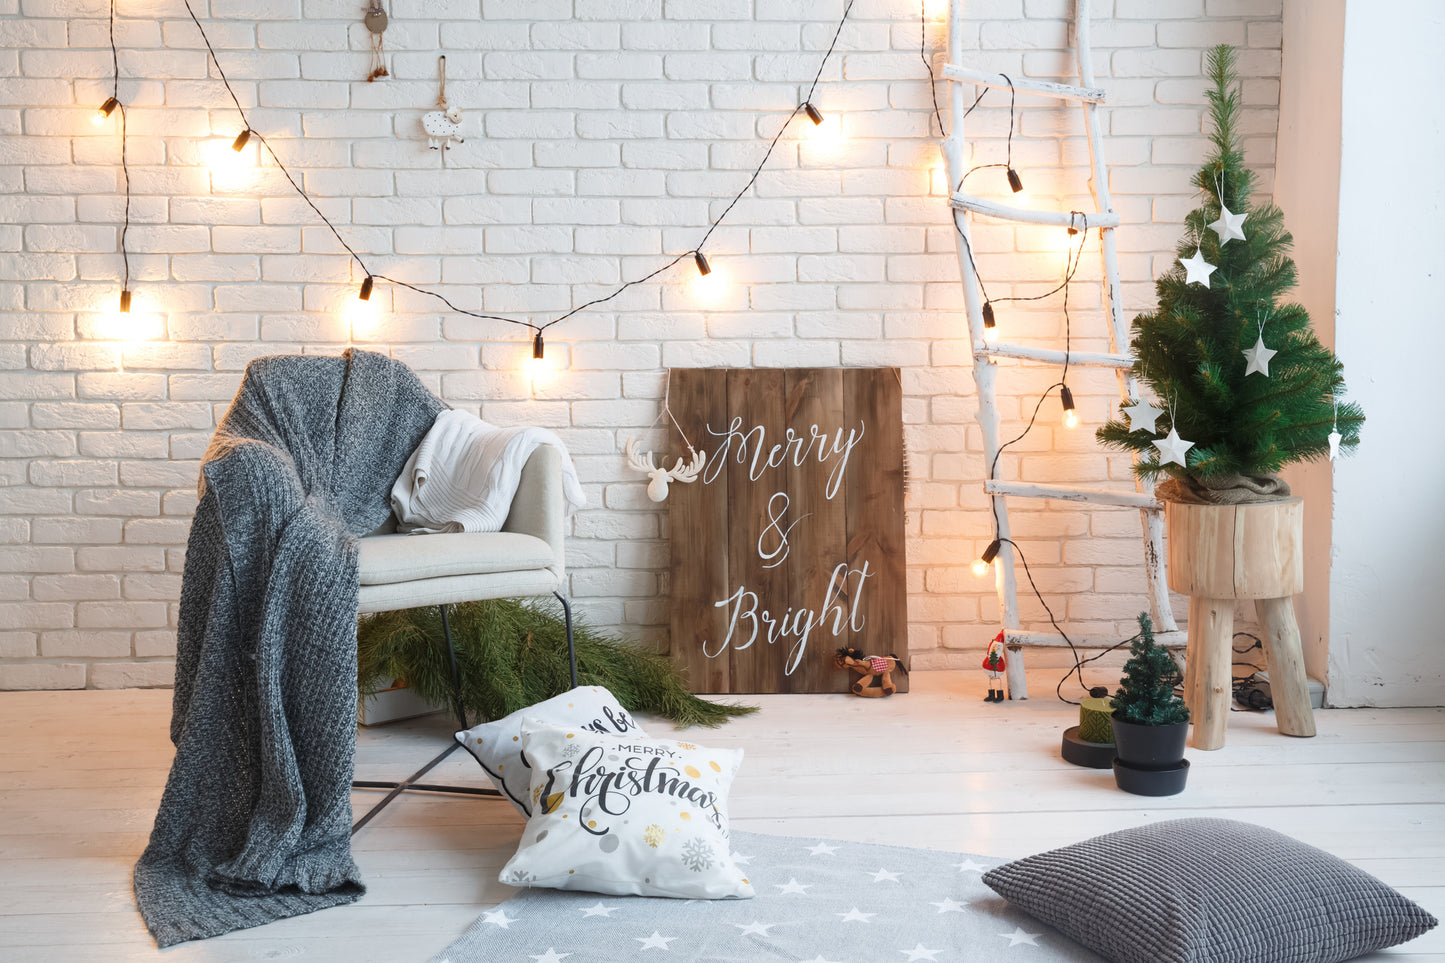 How to Decorate Your Home for Winter